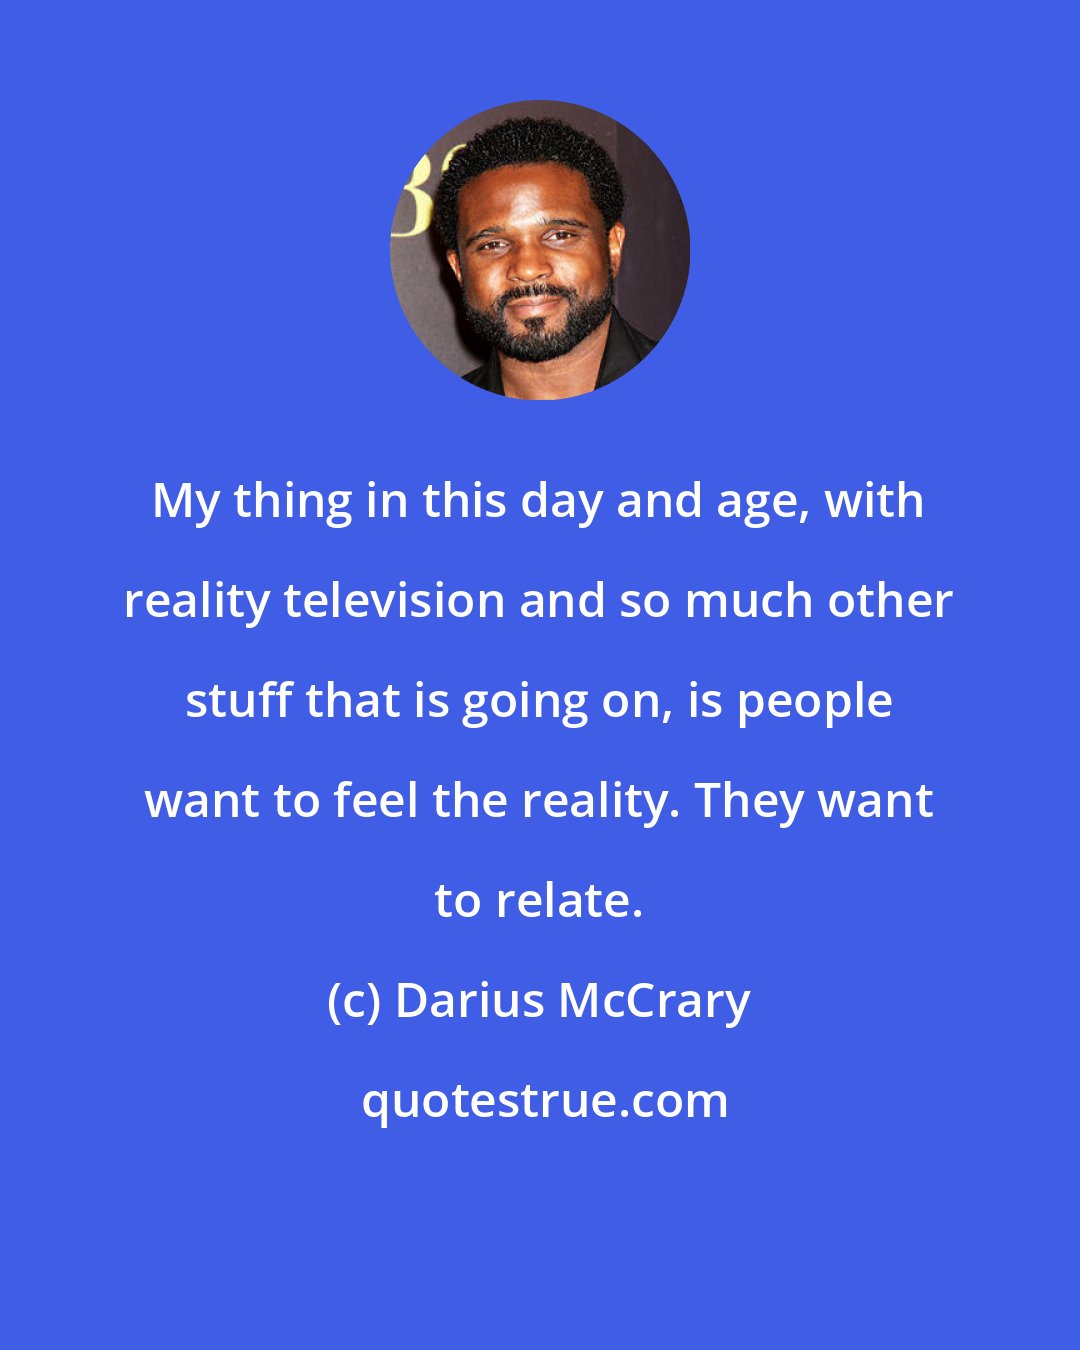 Darius McCrary: My thing in this day and age, with reality television and so much other stuff that is going on, is people want to feel the reality. They want to relate.